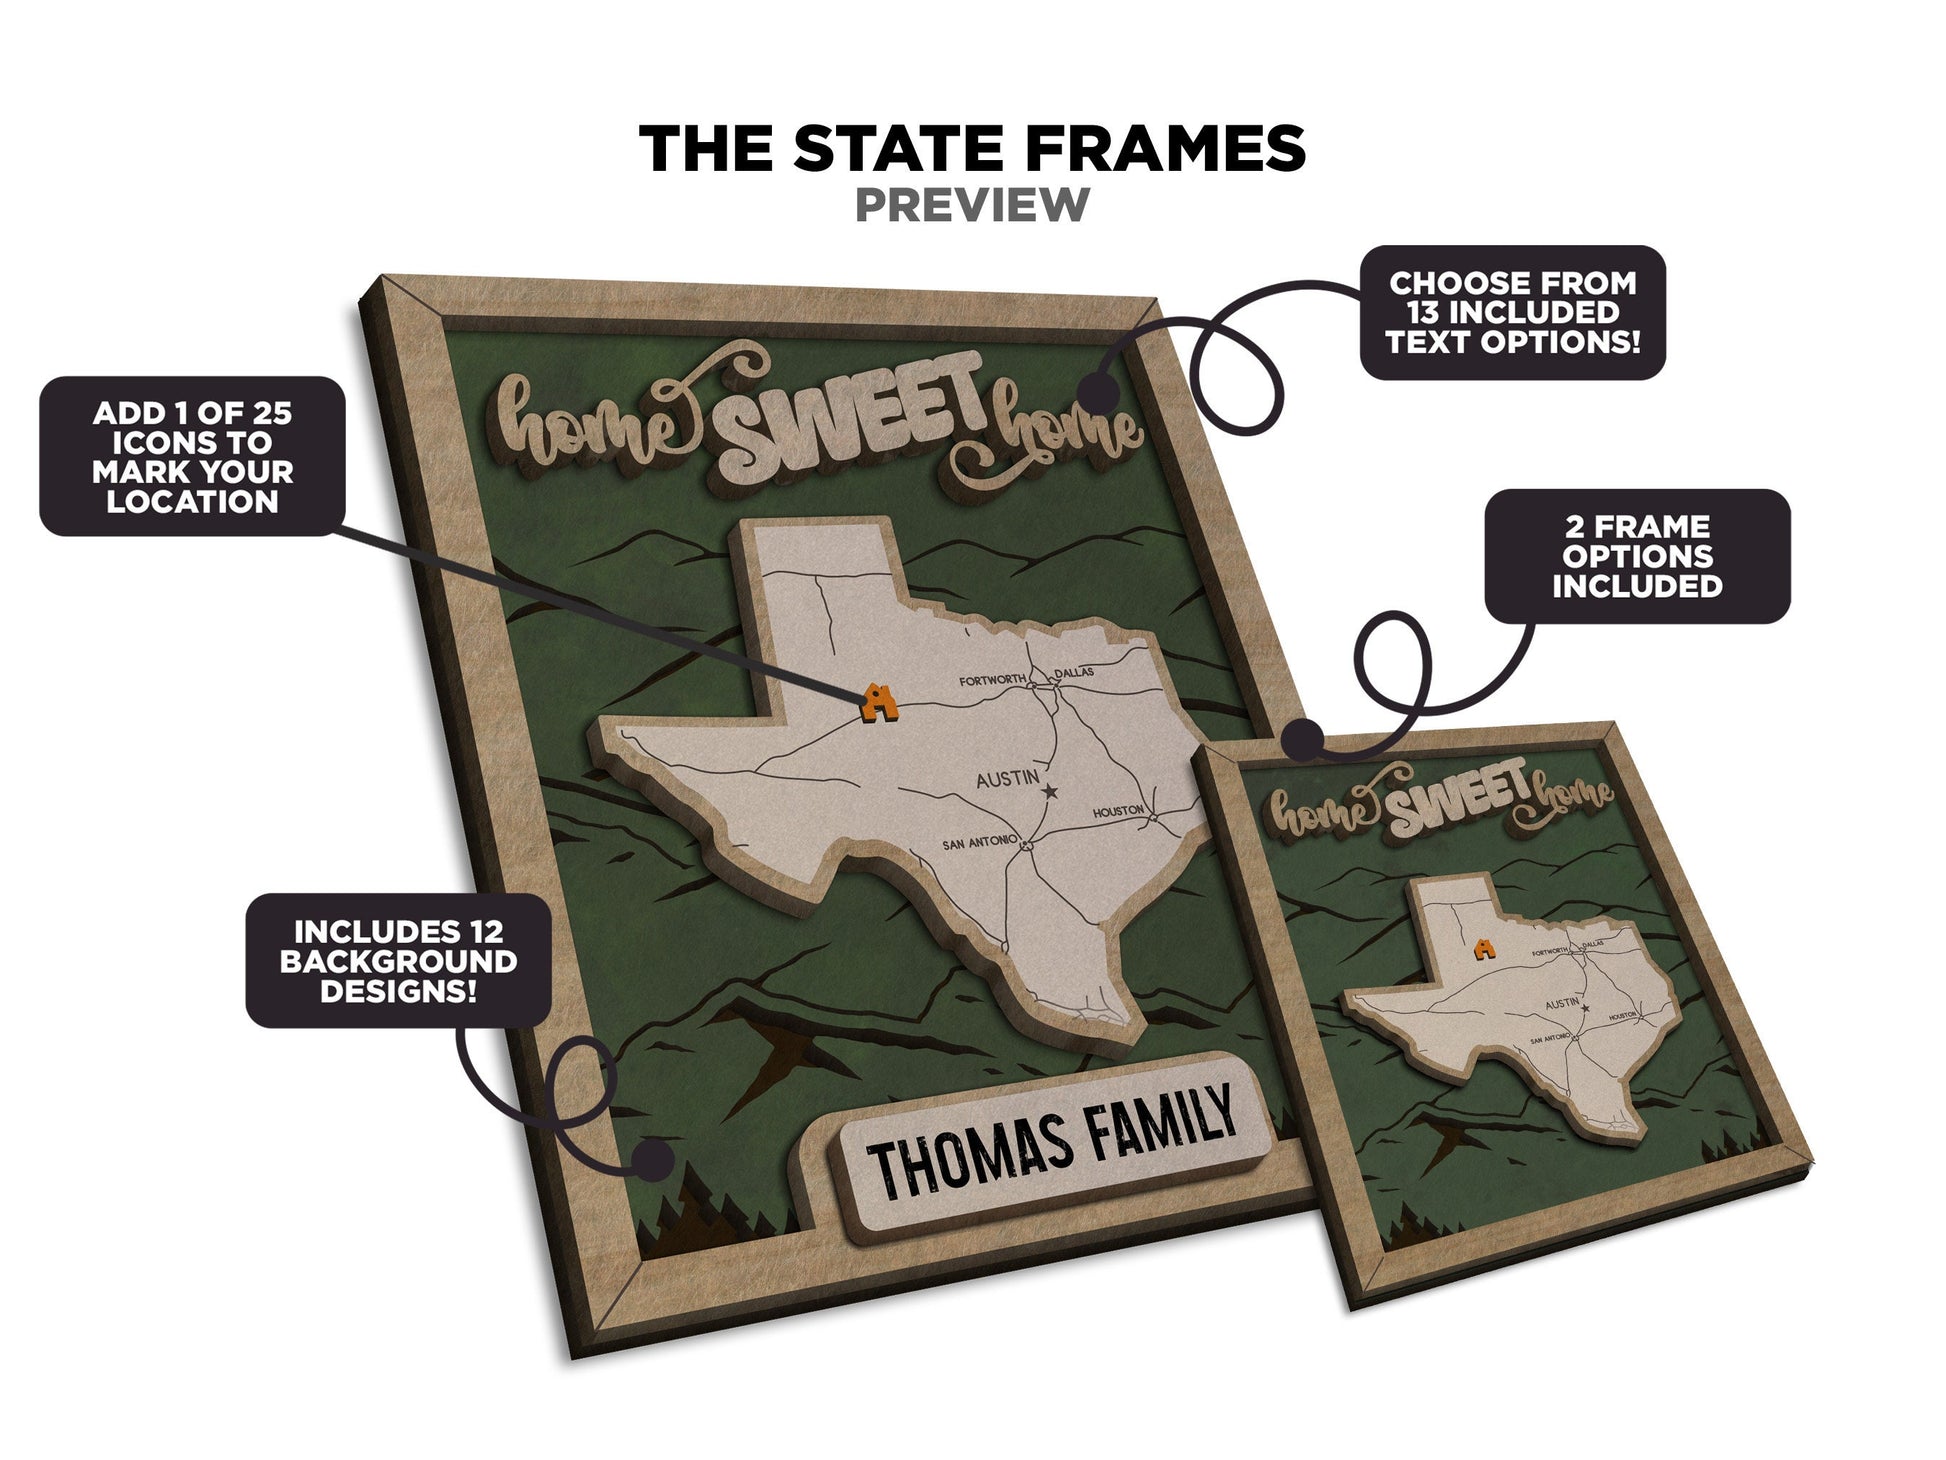 The Hawaii State Frame - 13 text options, 12 backgrounds, 25 icons Included - Make over 7,500 designs - Glowforge & Lightburn Tested